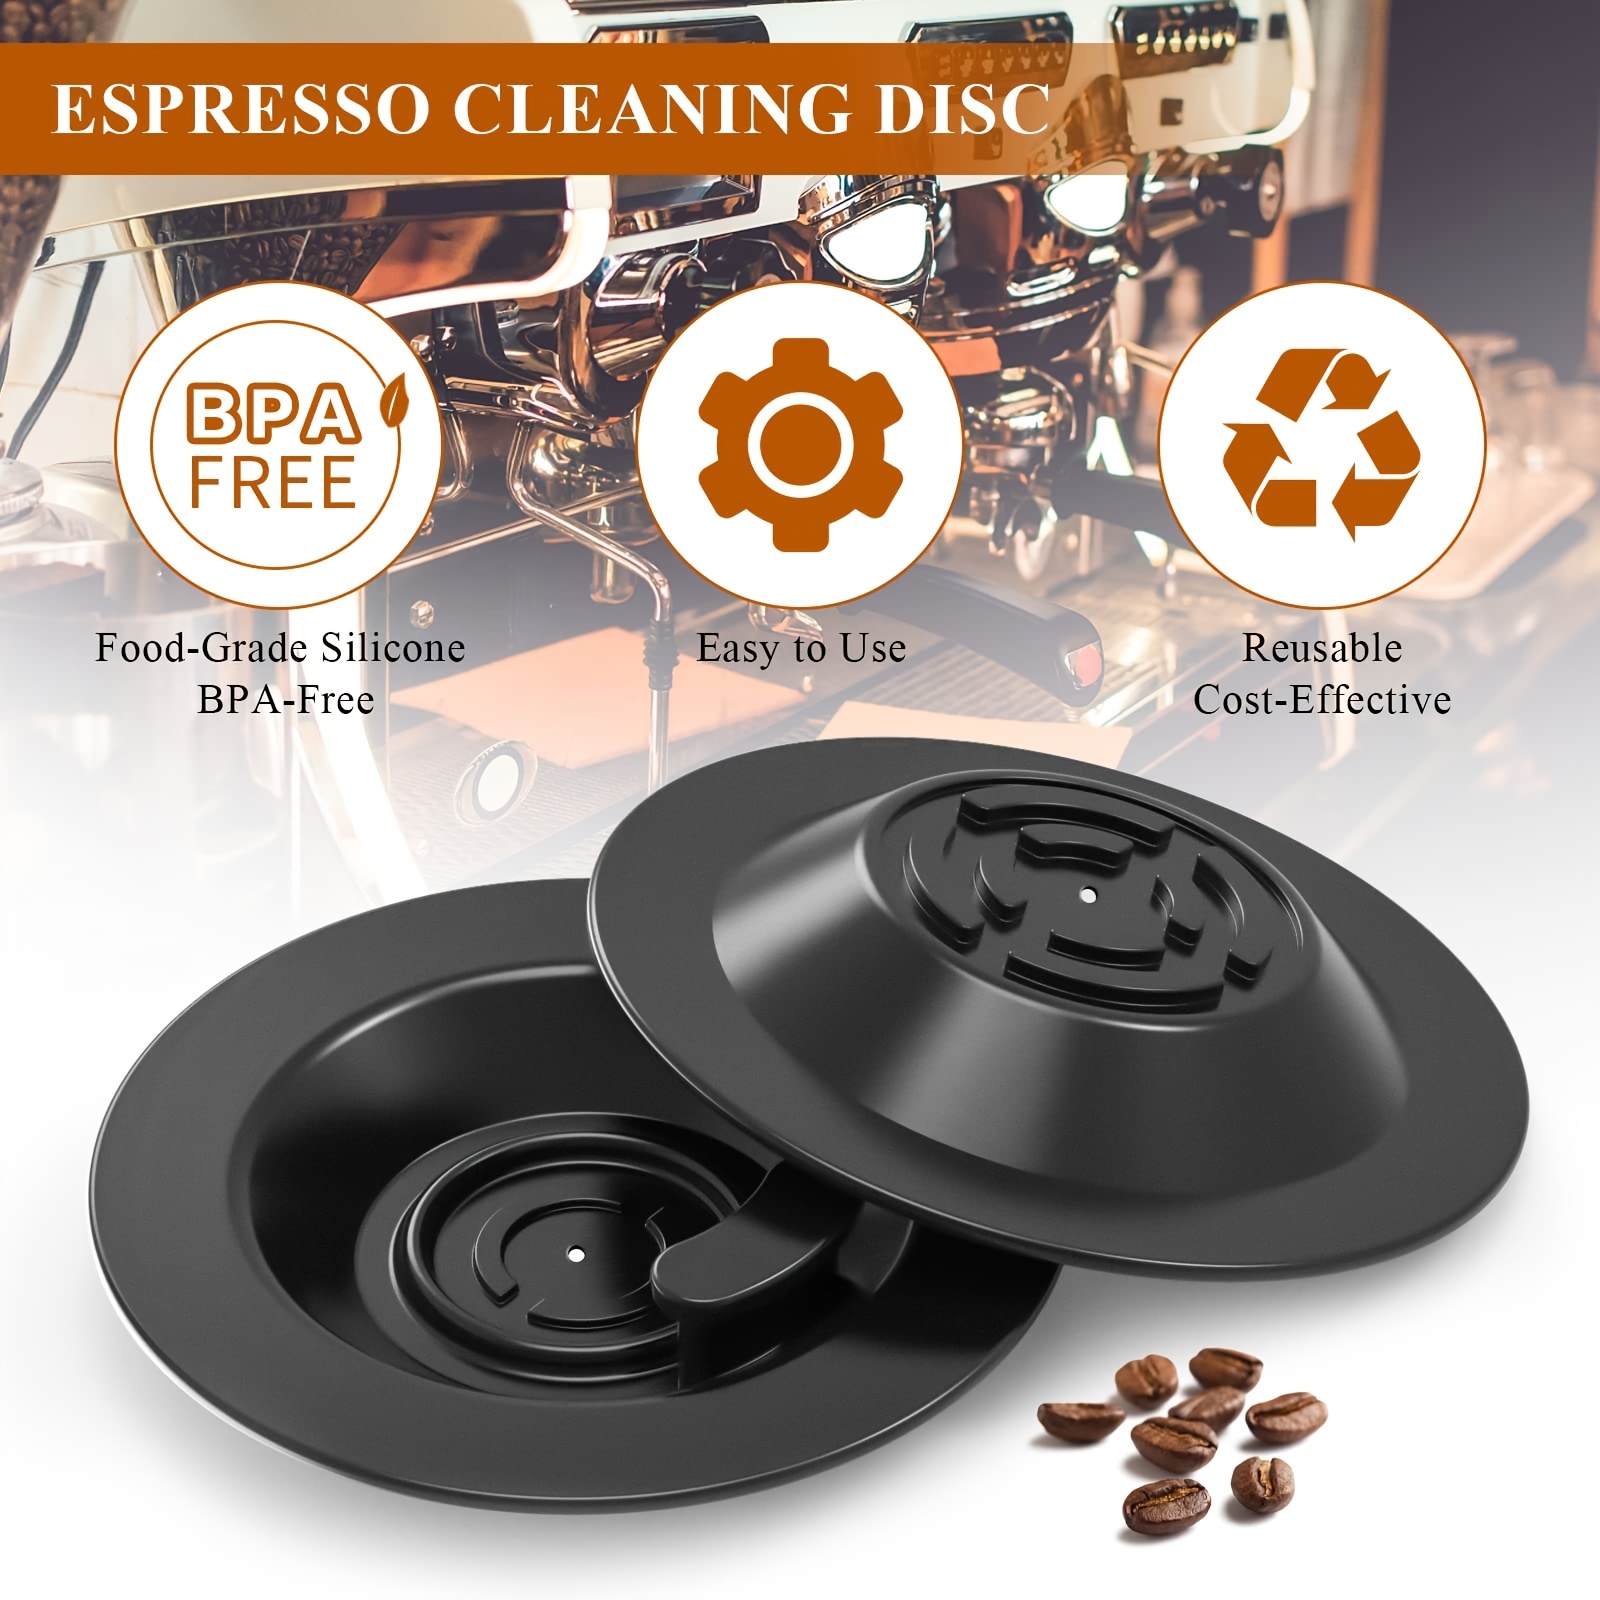 Espresso Cleaning Disc for Select Breville Espresso Machines